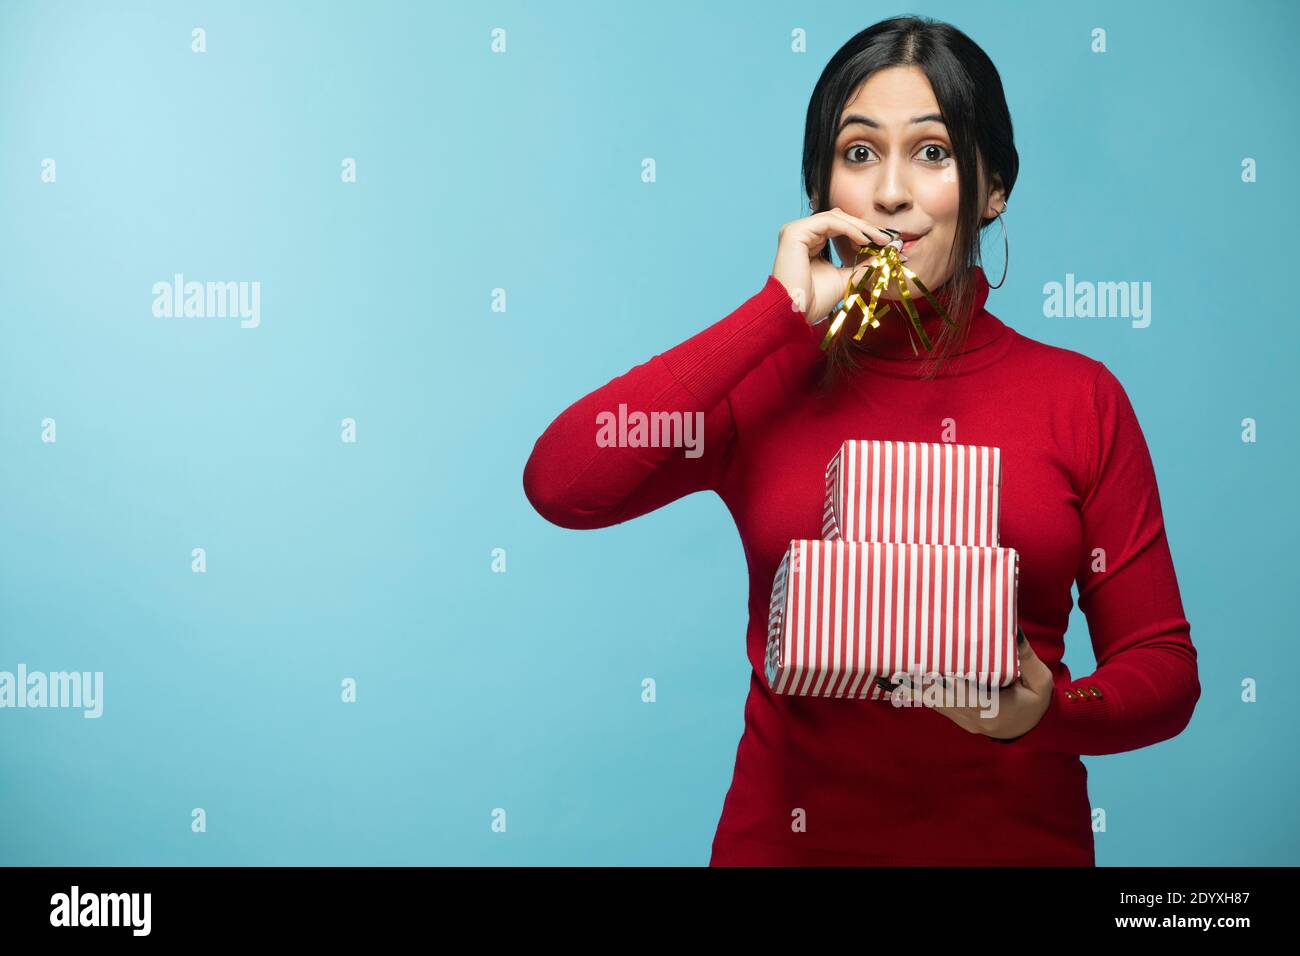 Young Female blowing party horn wearing red sweatshirt and holding gift box in hand Stock Photo